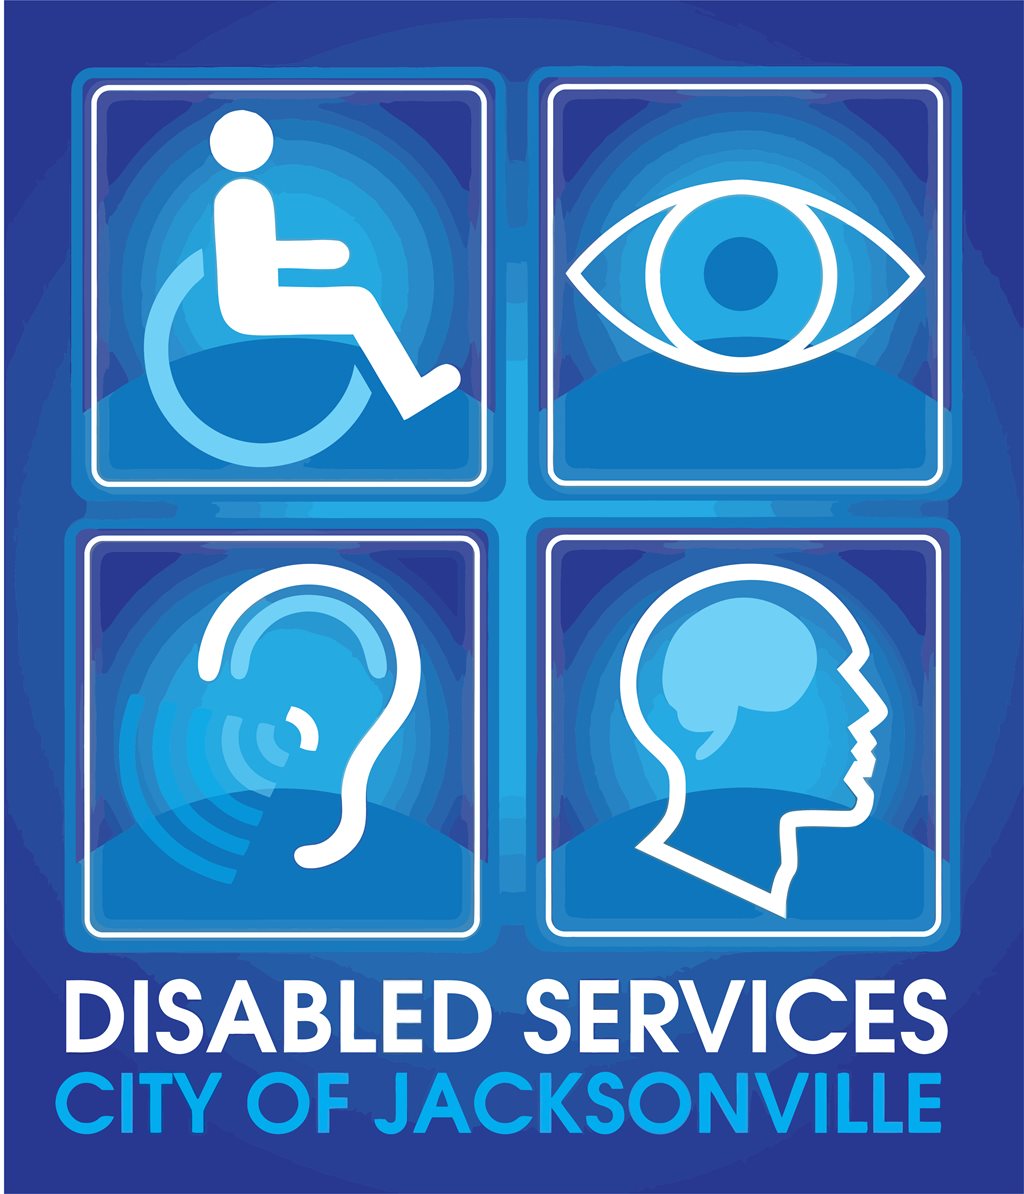 City of Jacksonville Disabled Services Logo featuring icons of wheelchair, eye, ear and brain